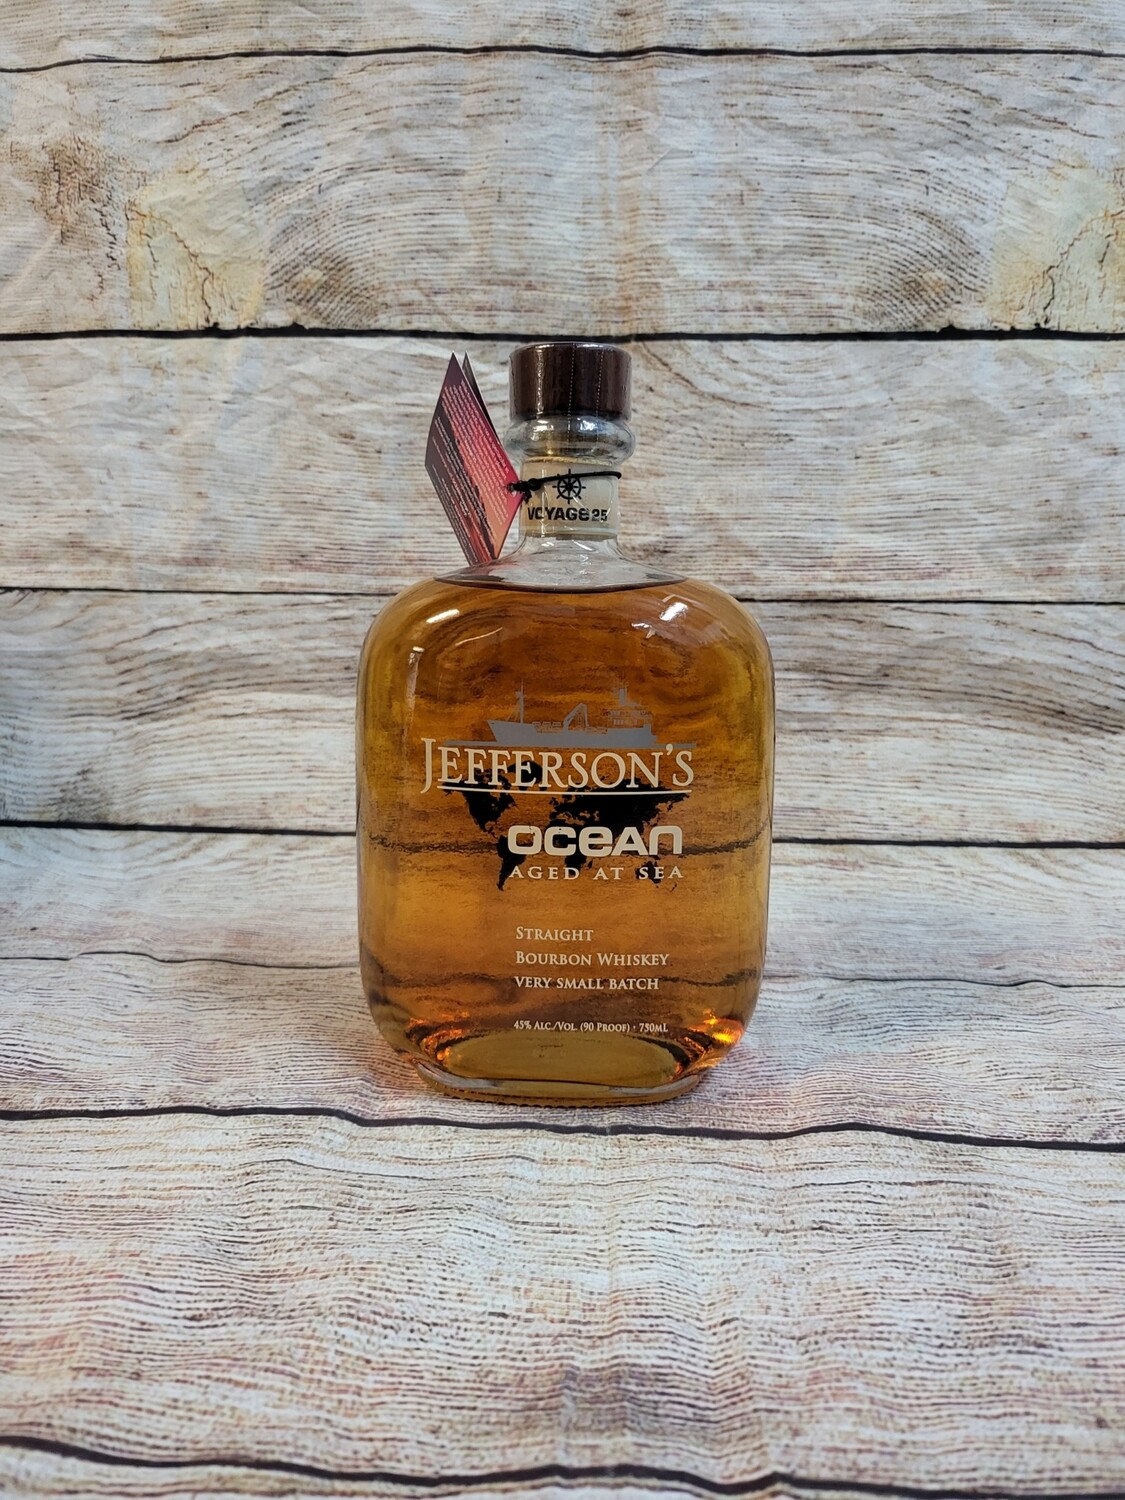 Jefferson's Reserve Ocean Aged at Sea Voyage 25 750ml